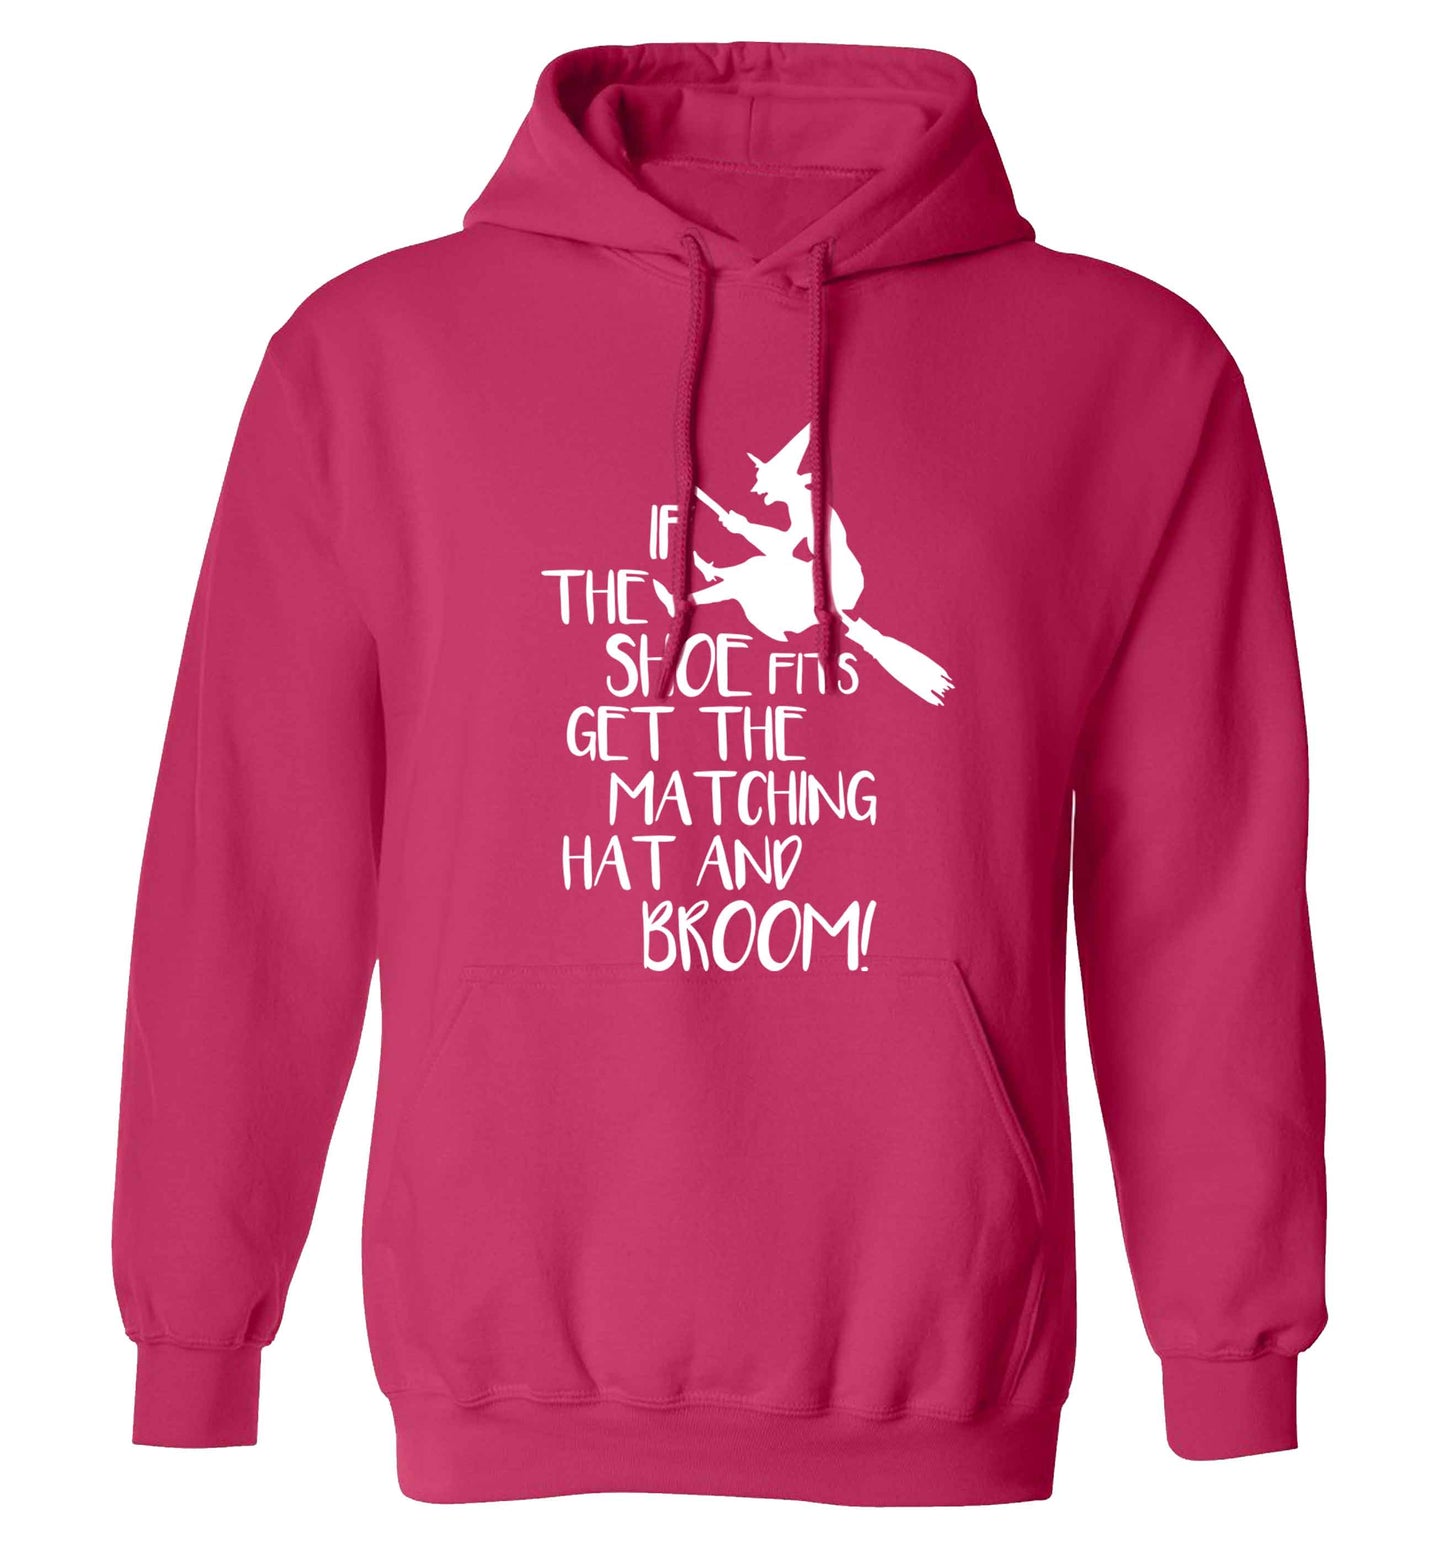 If the shoe fits get the matching hat and broom adults unisex pink hoodie 2XL